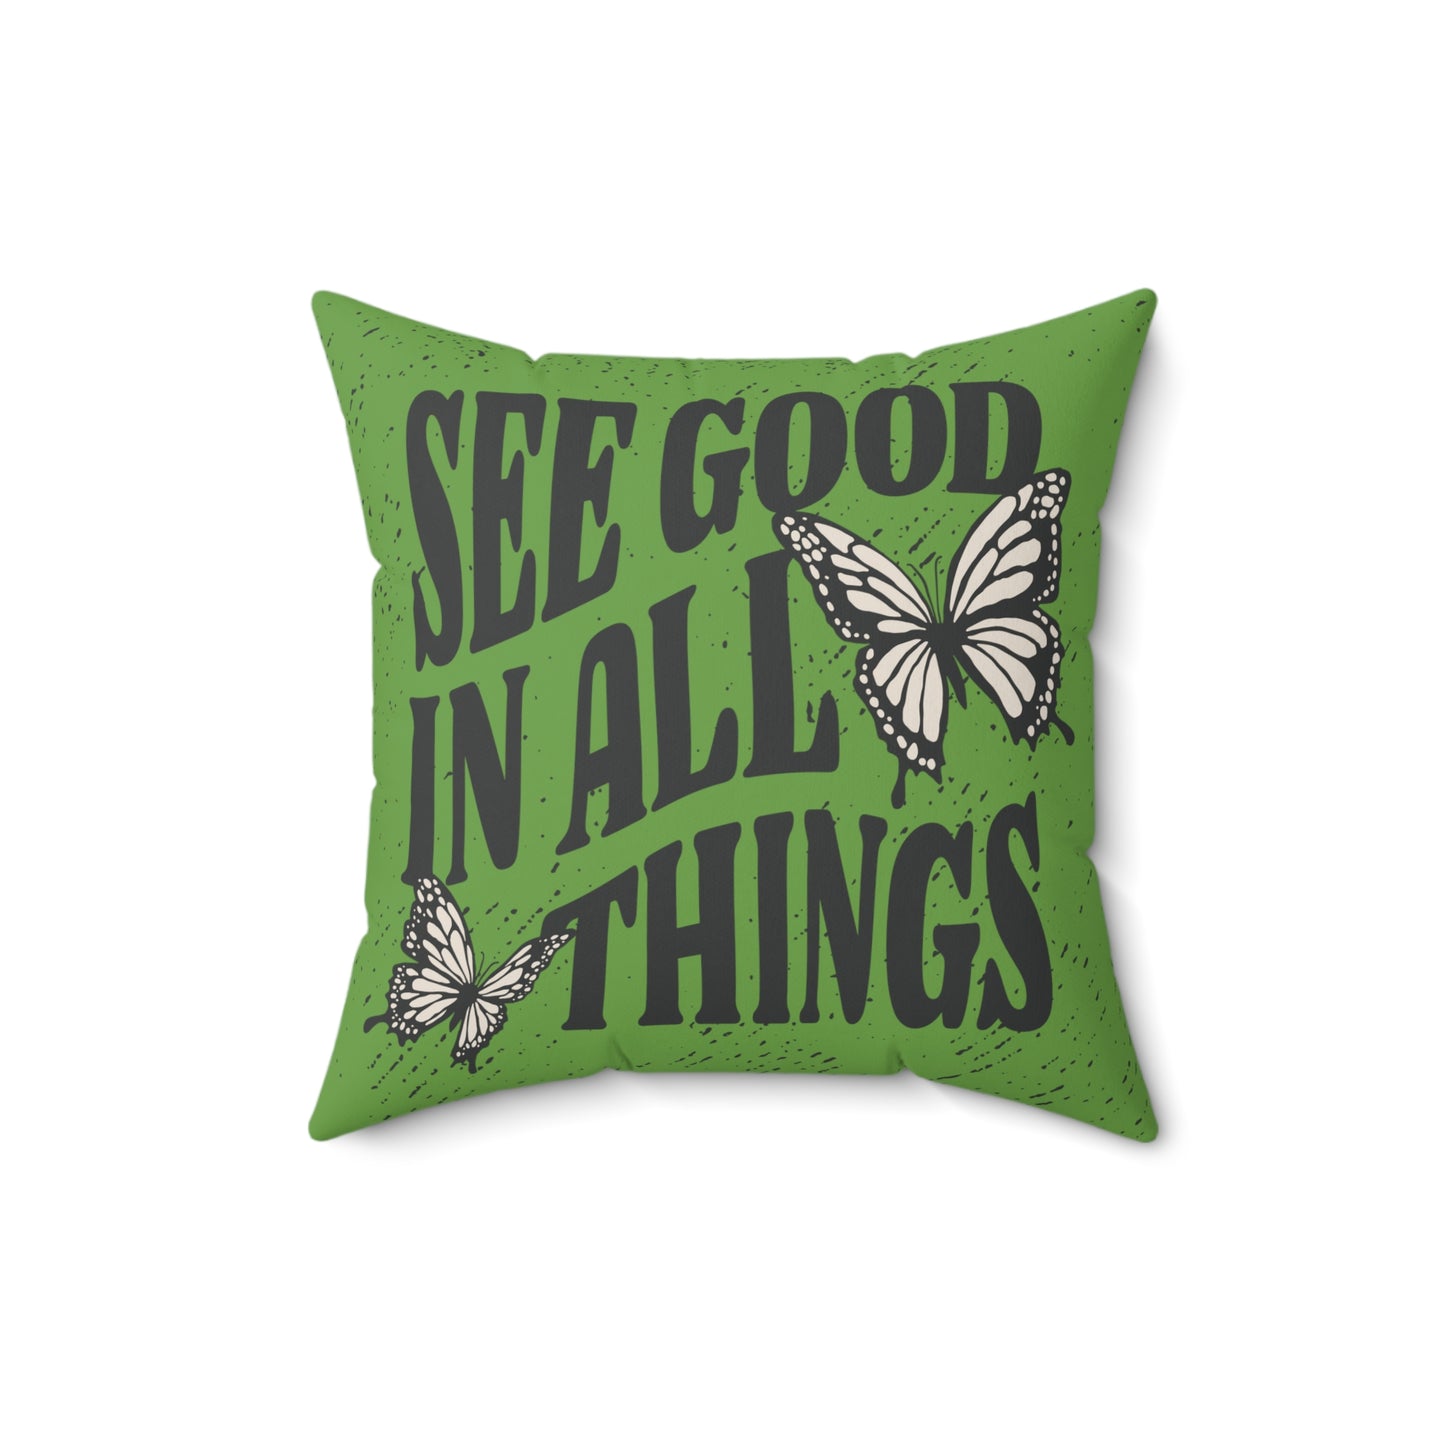 See Good in All Things Square Pillow